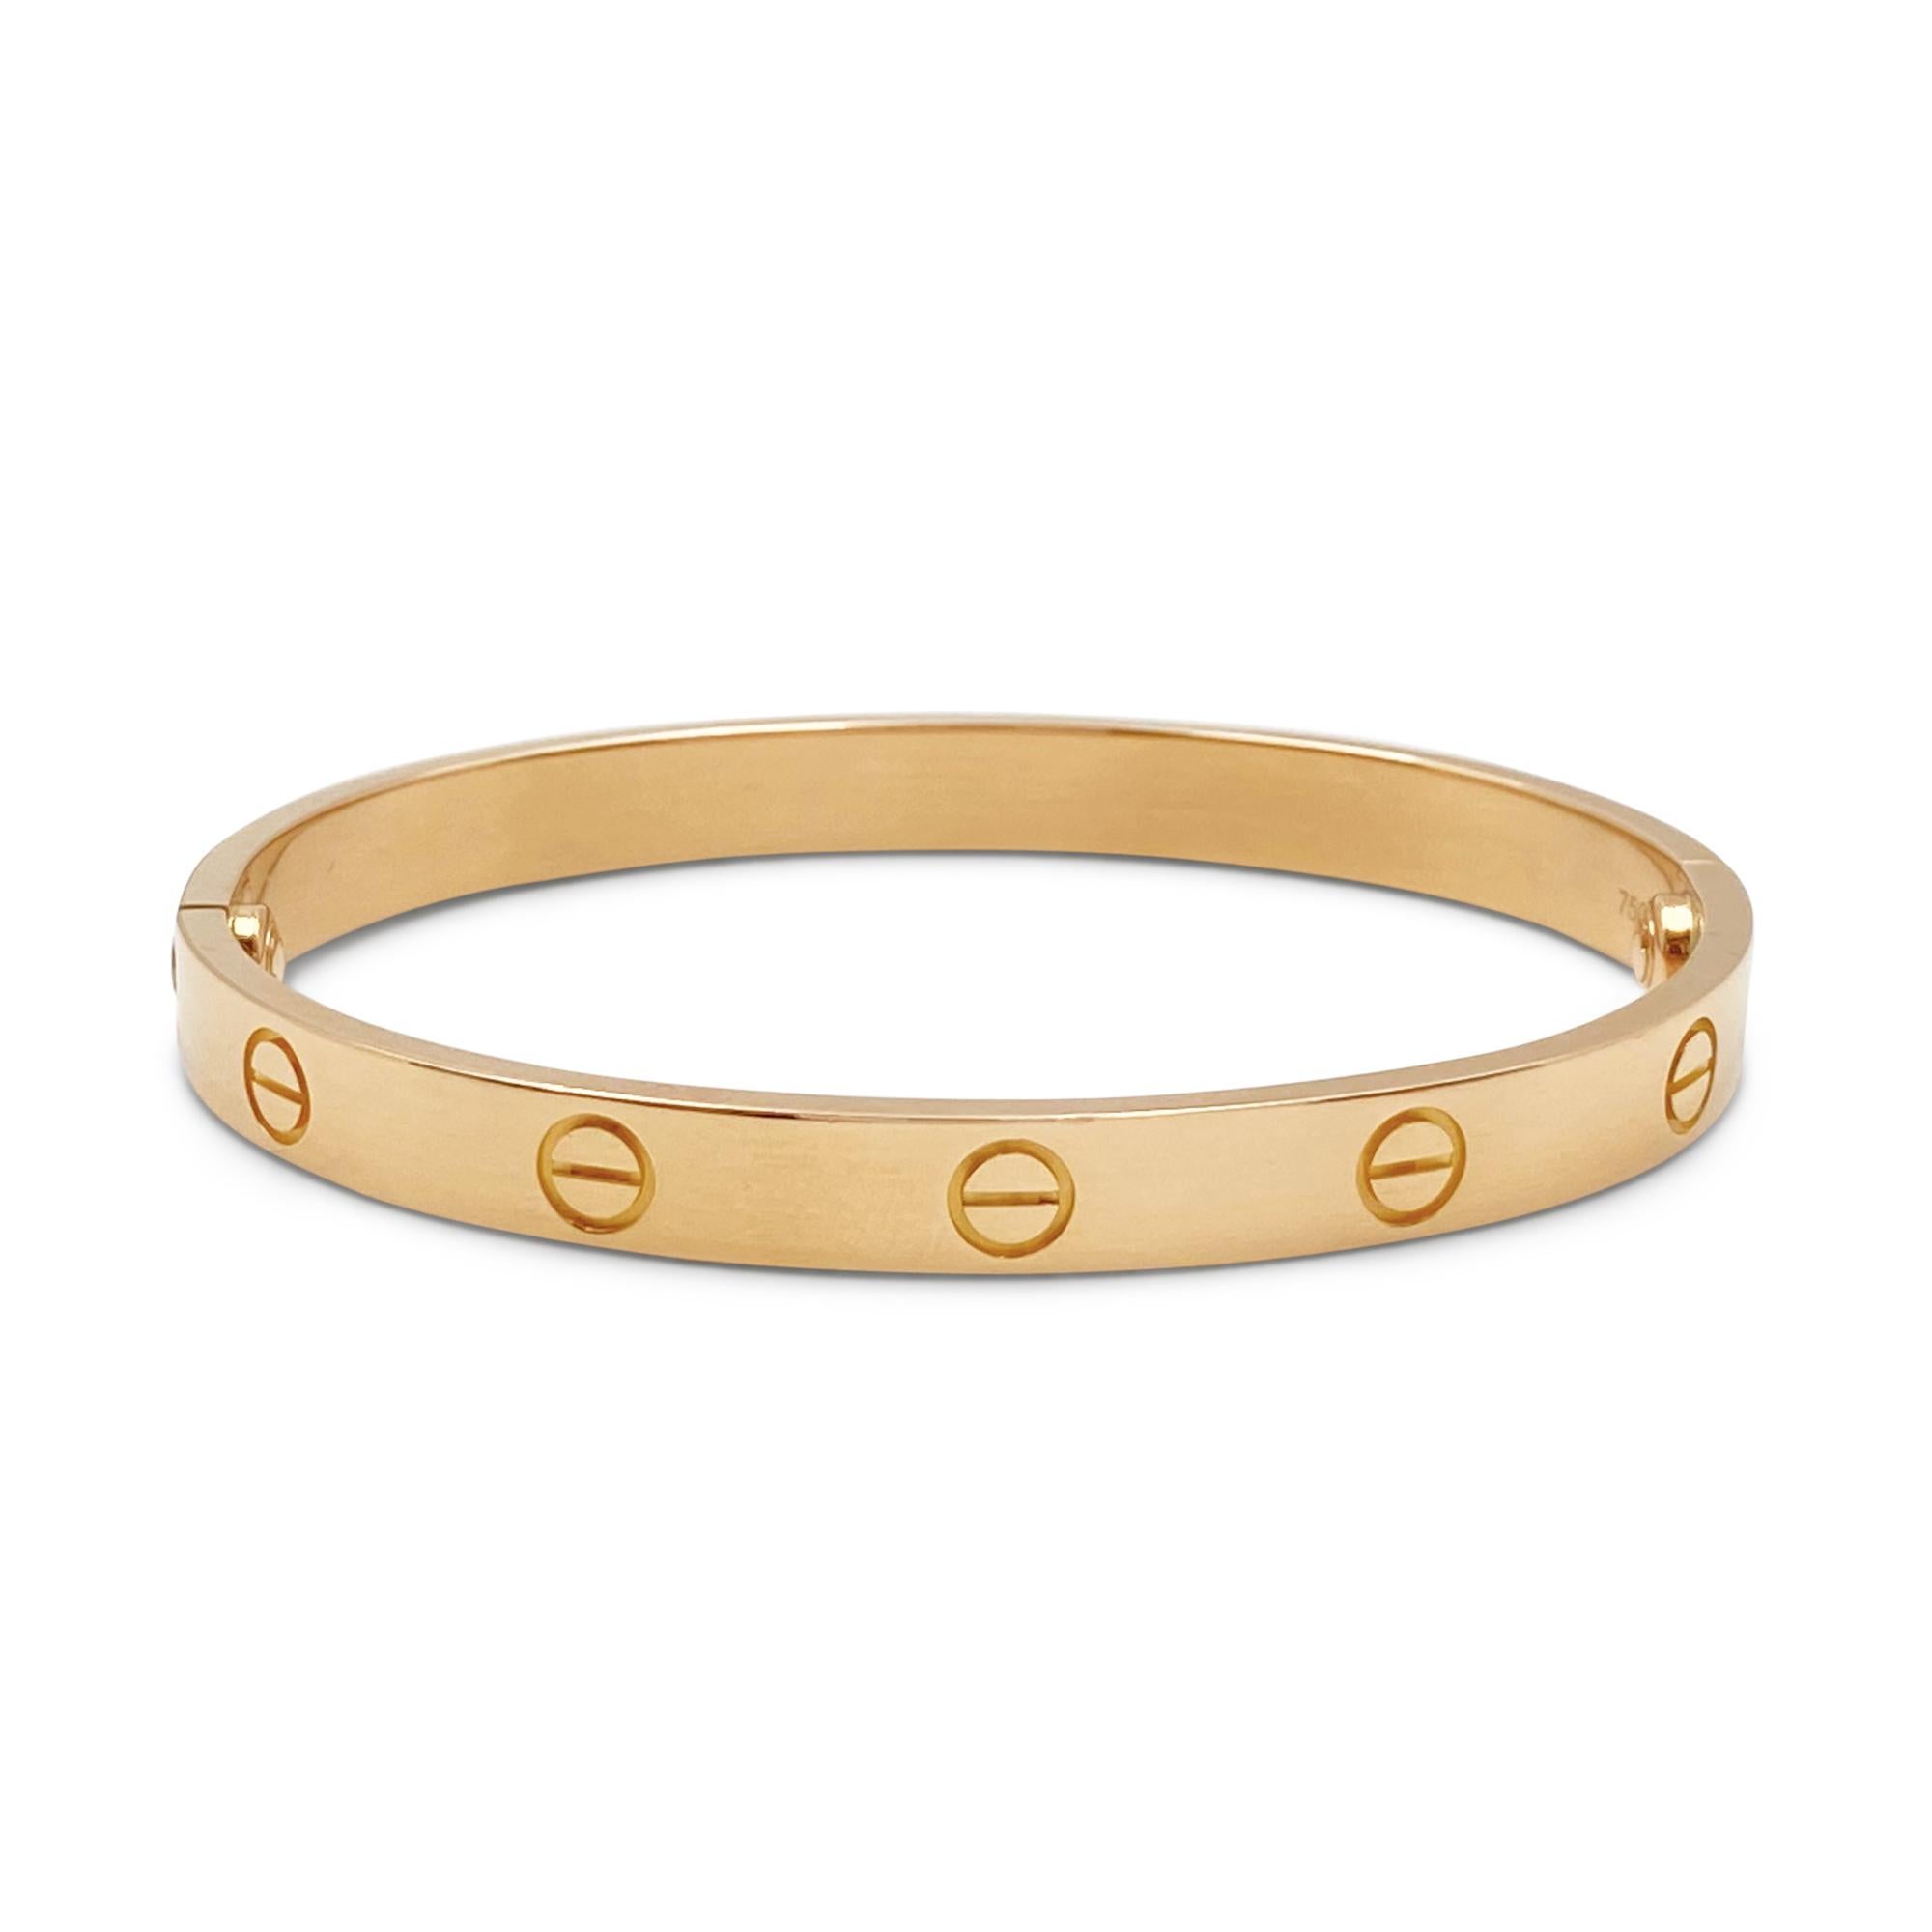 Authentic Cartier 'Love' bracelet crafted in 18 karat rose gold. Size 17. Signed Cartier, 17, 750, with serial number and hallmarks. New screw system with Cartier enhancement for added security.  The bracelet is presented with a Cartier pouch and